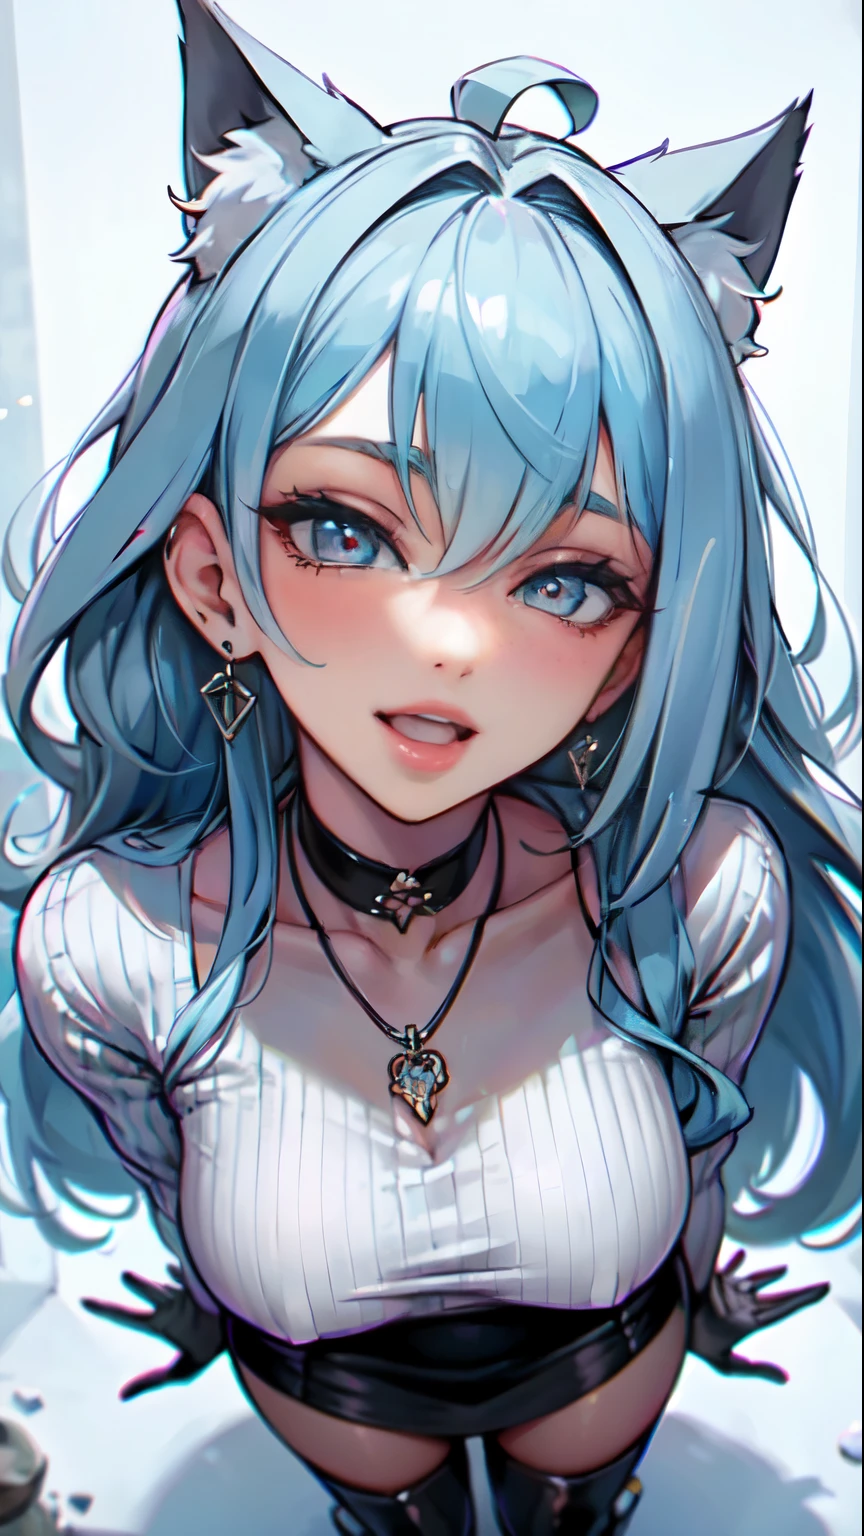 Masterpiece, beautiful art, professional artist, 8k, art style by sciamano240, very detailed face, very detailed hair, very detailed clothes, 1girl, perfectly drawn body, beautiful face, long hair, light blue hair , very detailed blue vertical cat eyes, square glasses, pouty lips , rosey cheeks, intricate details in eyes, extreme close up of face, see only head and neck, staring directly at viewer, wearing winter clothes, sweater, winter coat, necklace, choker, earrings, gloves, pencil skirt, black tigh boots, some freckles, big wide grin, in love with the viewer expression, sunny winter setting, walking outside, pov mouth open and tongue out,